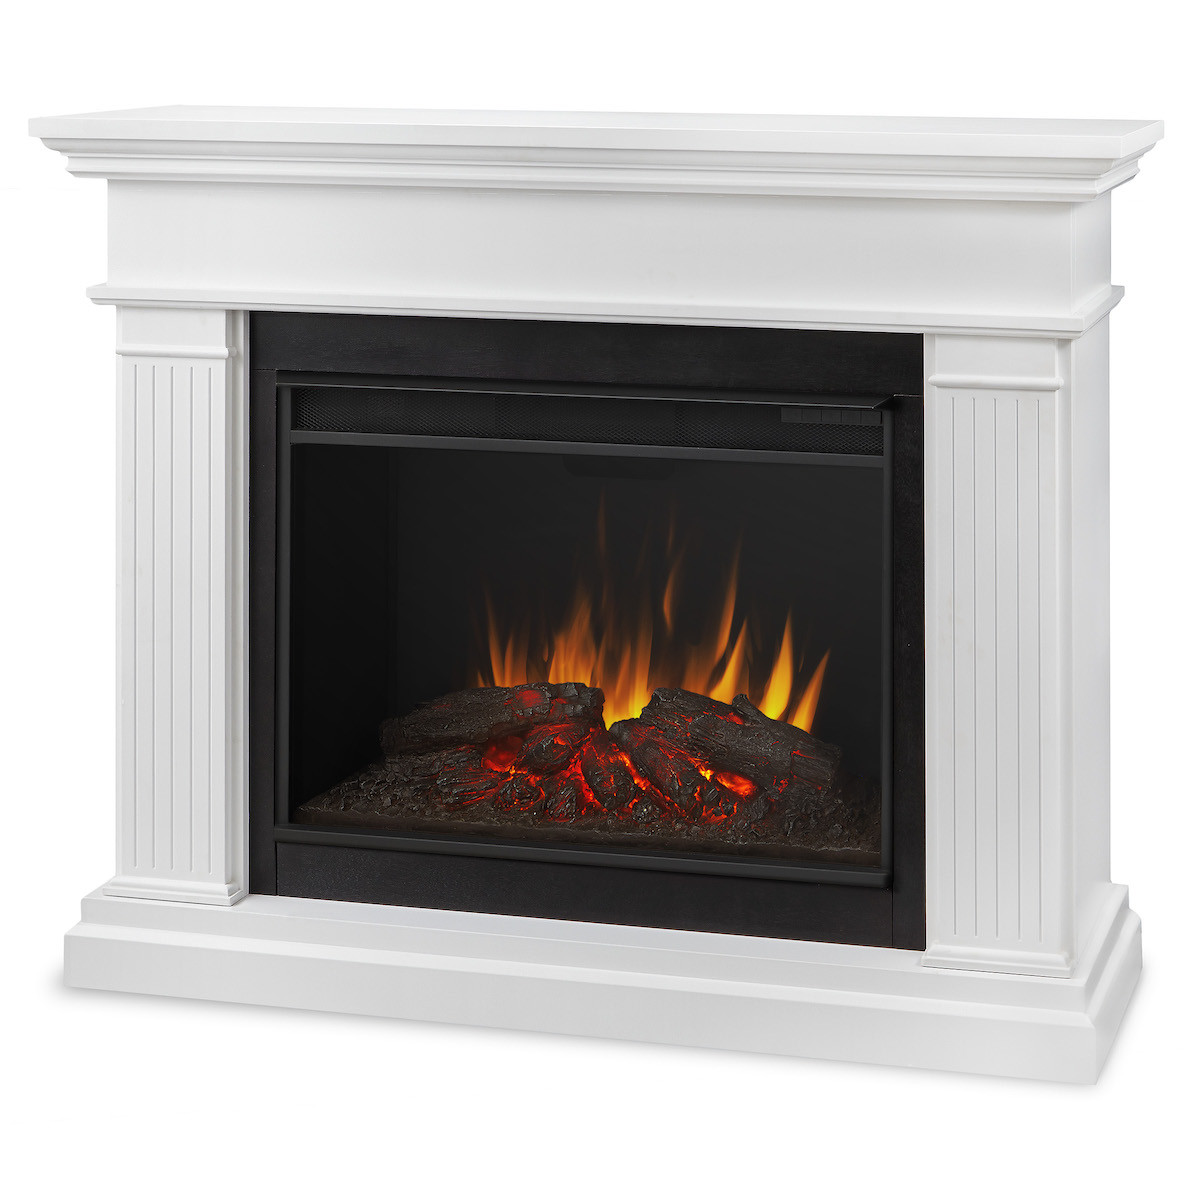 Real Flame White Electric Fireplace
 Real Flame Kennedy Grand Electric Fireplace in White